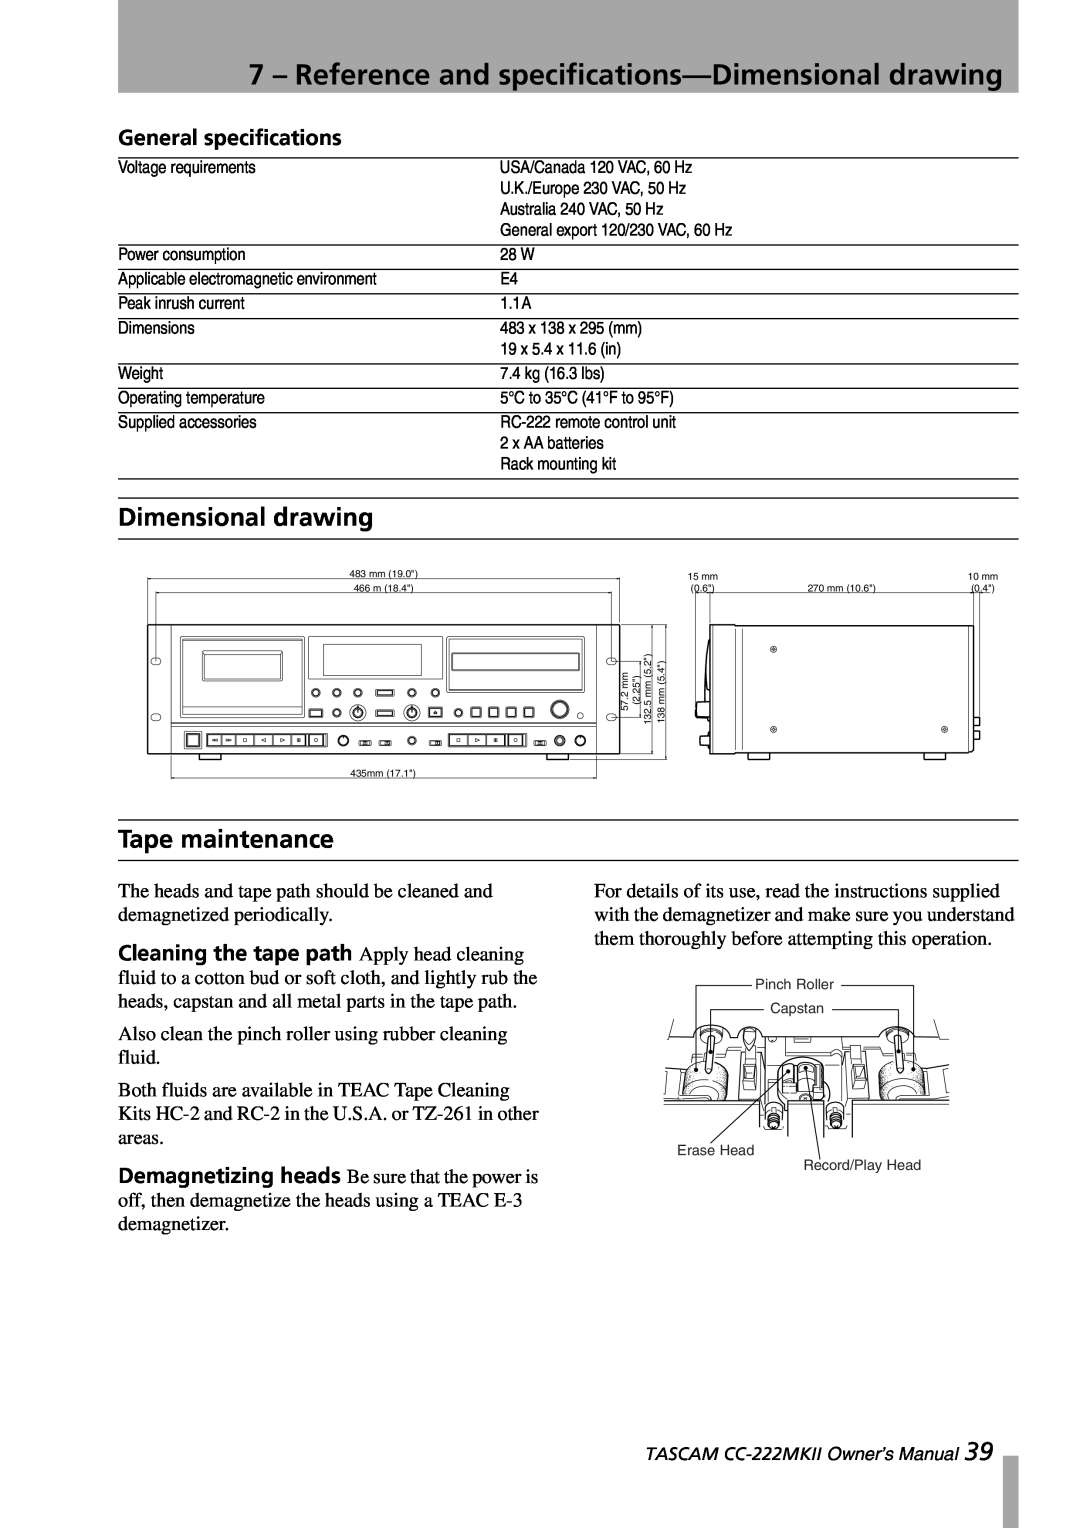 Tascam CC-222MKII owner manual Dimensional drawing, Tape maintenance, General specifications 